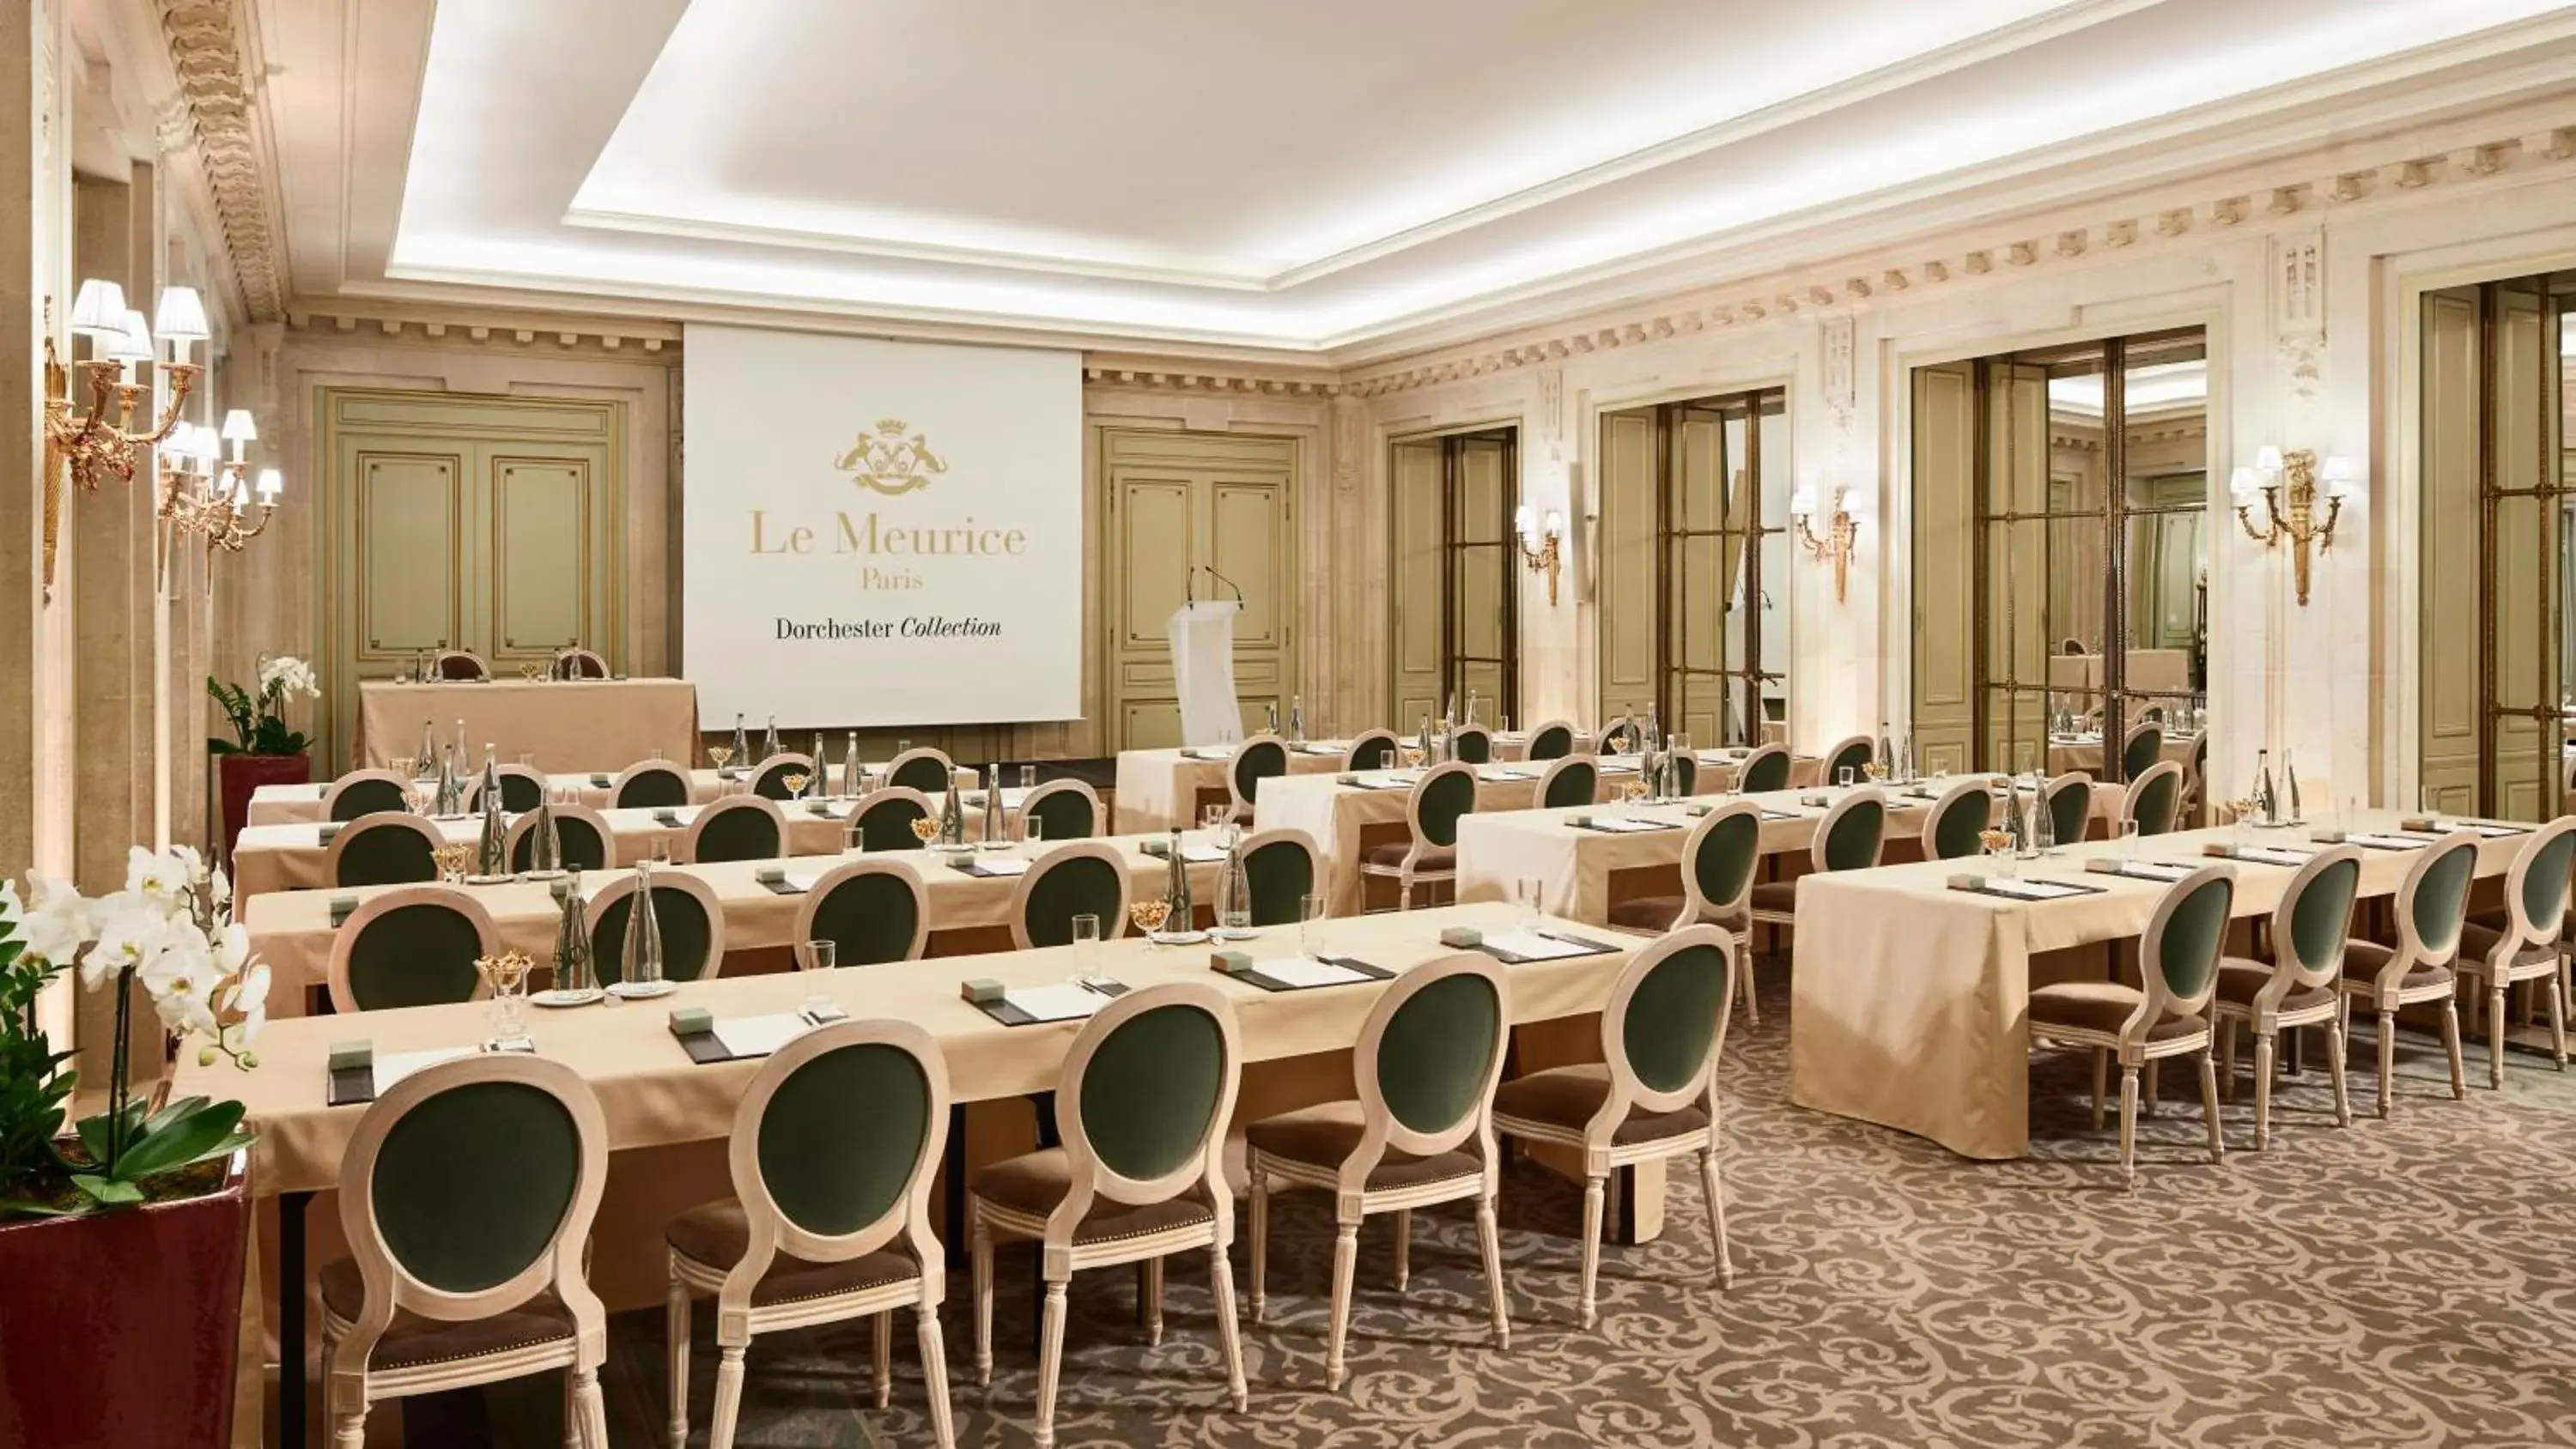 Meeting/conference room in Le Meurice - Dorchester Collection